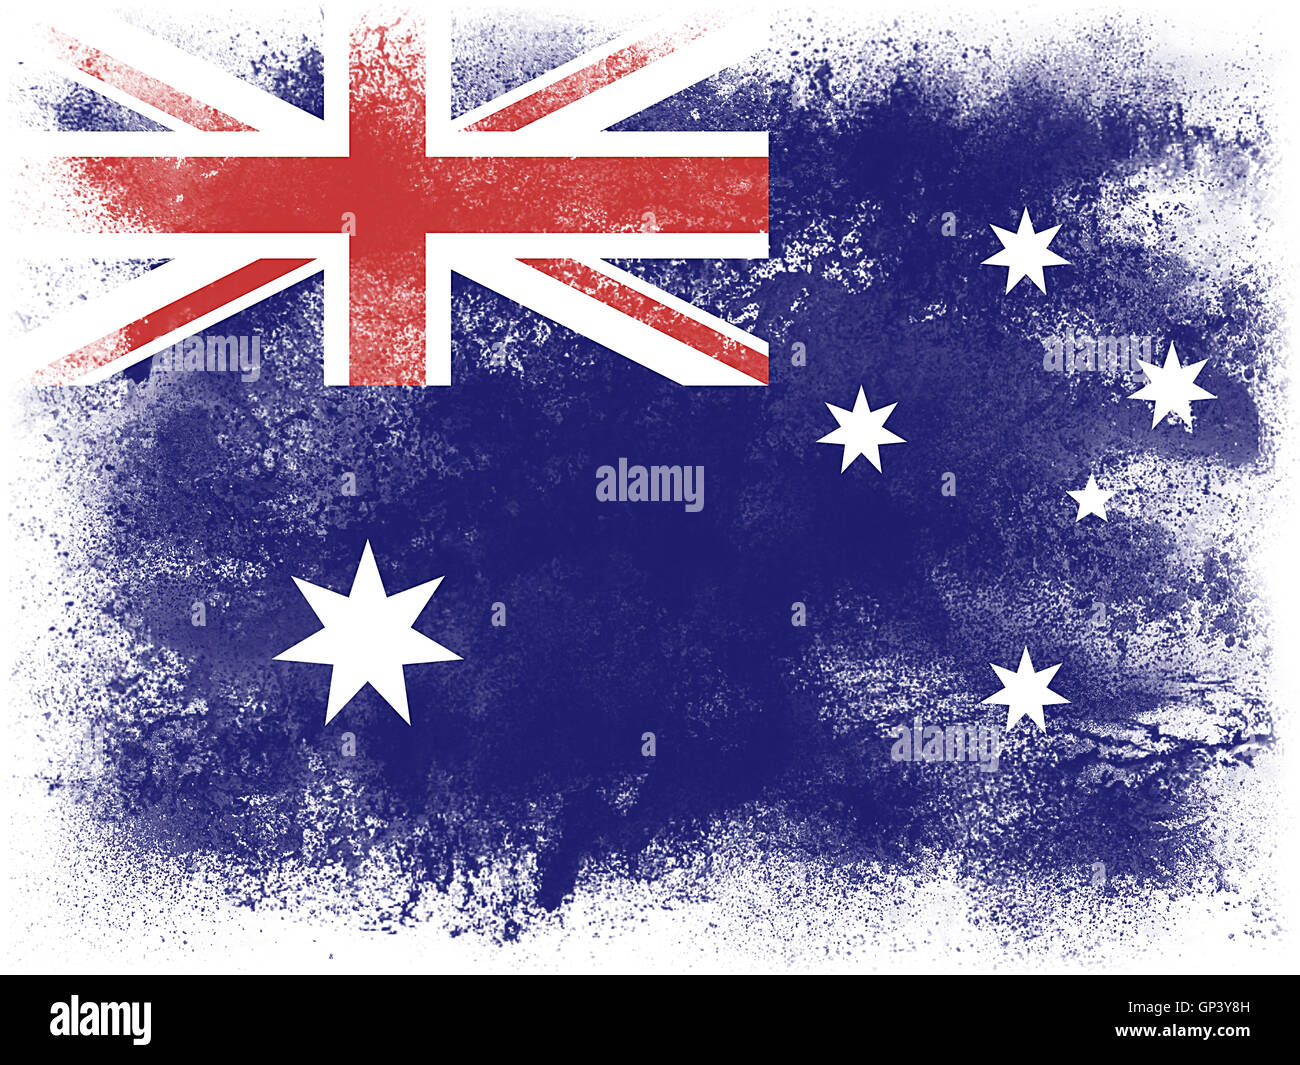 Powder paint exploding in colors of Australia flag isolated on white background. Abstract particles explosion of colorful dust. Stock Photo